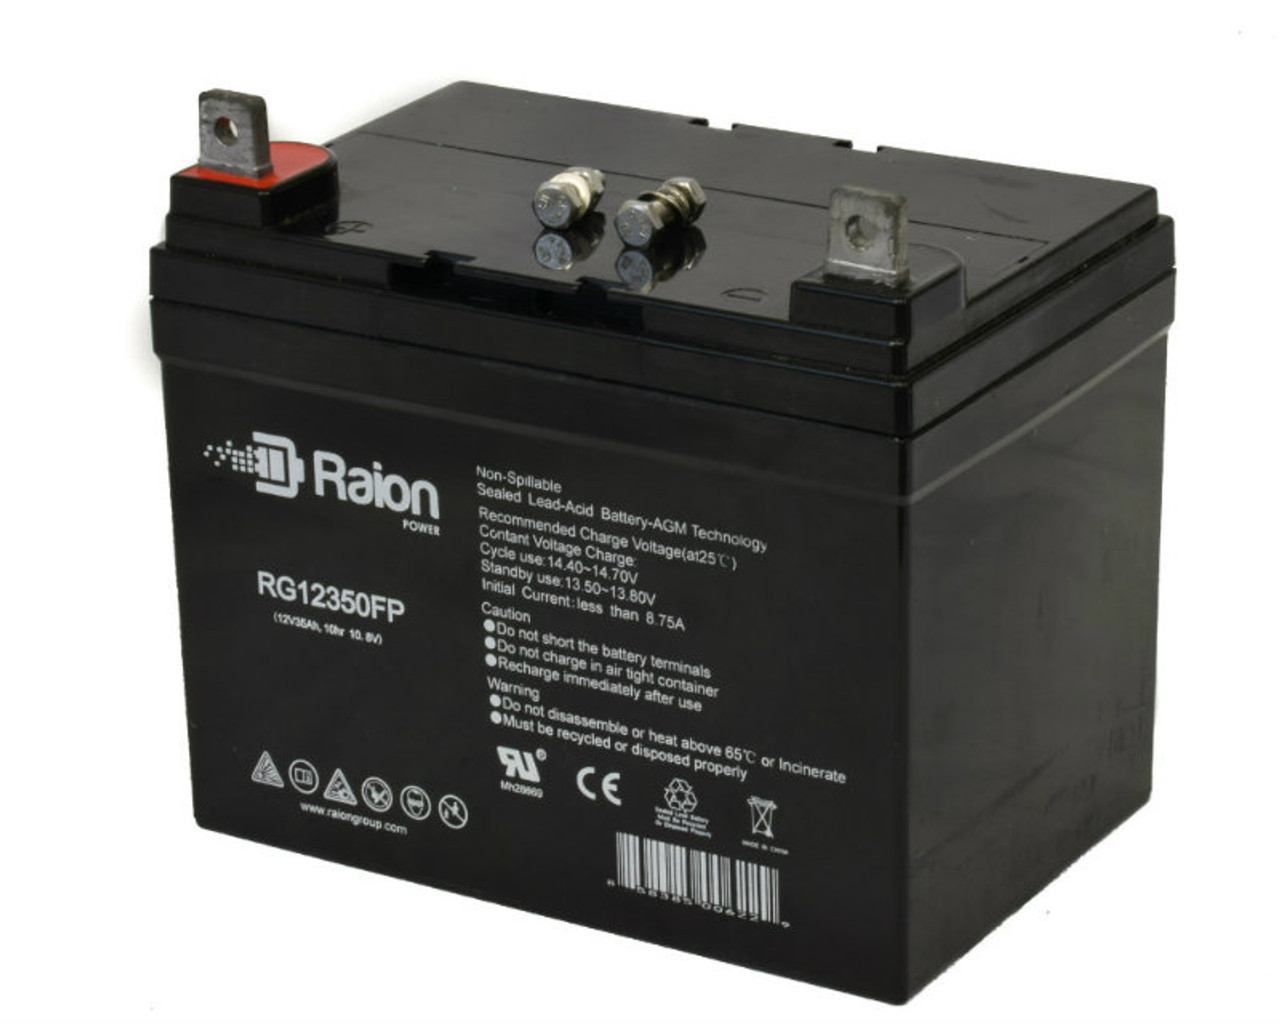 Raion Power Replacement 12V 35Ah RG12350FP Mobility Scooter Battery for Merits Health Products P107 (Travel Ease)